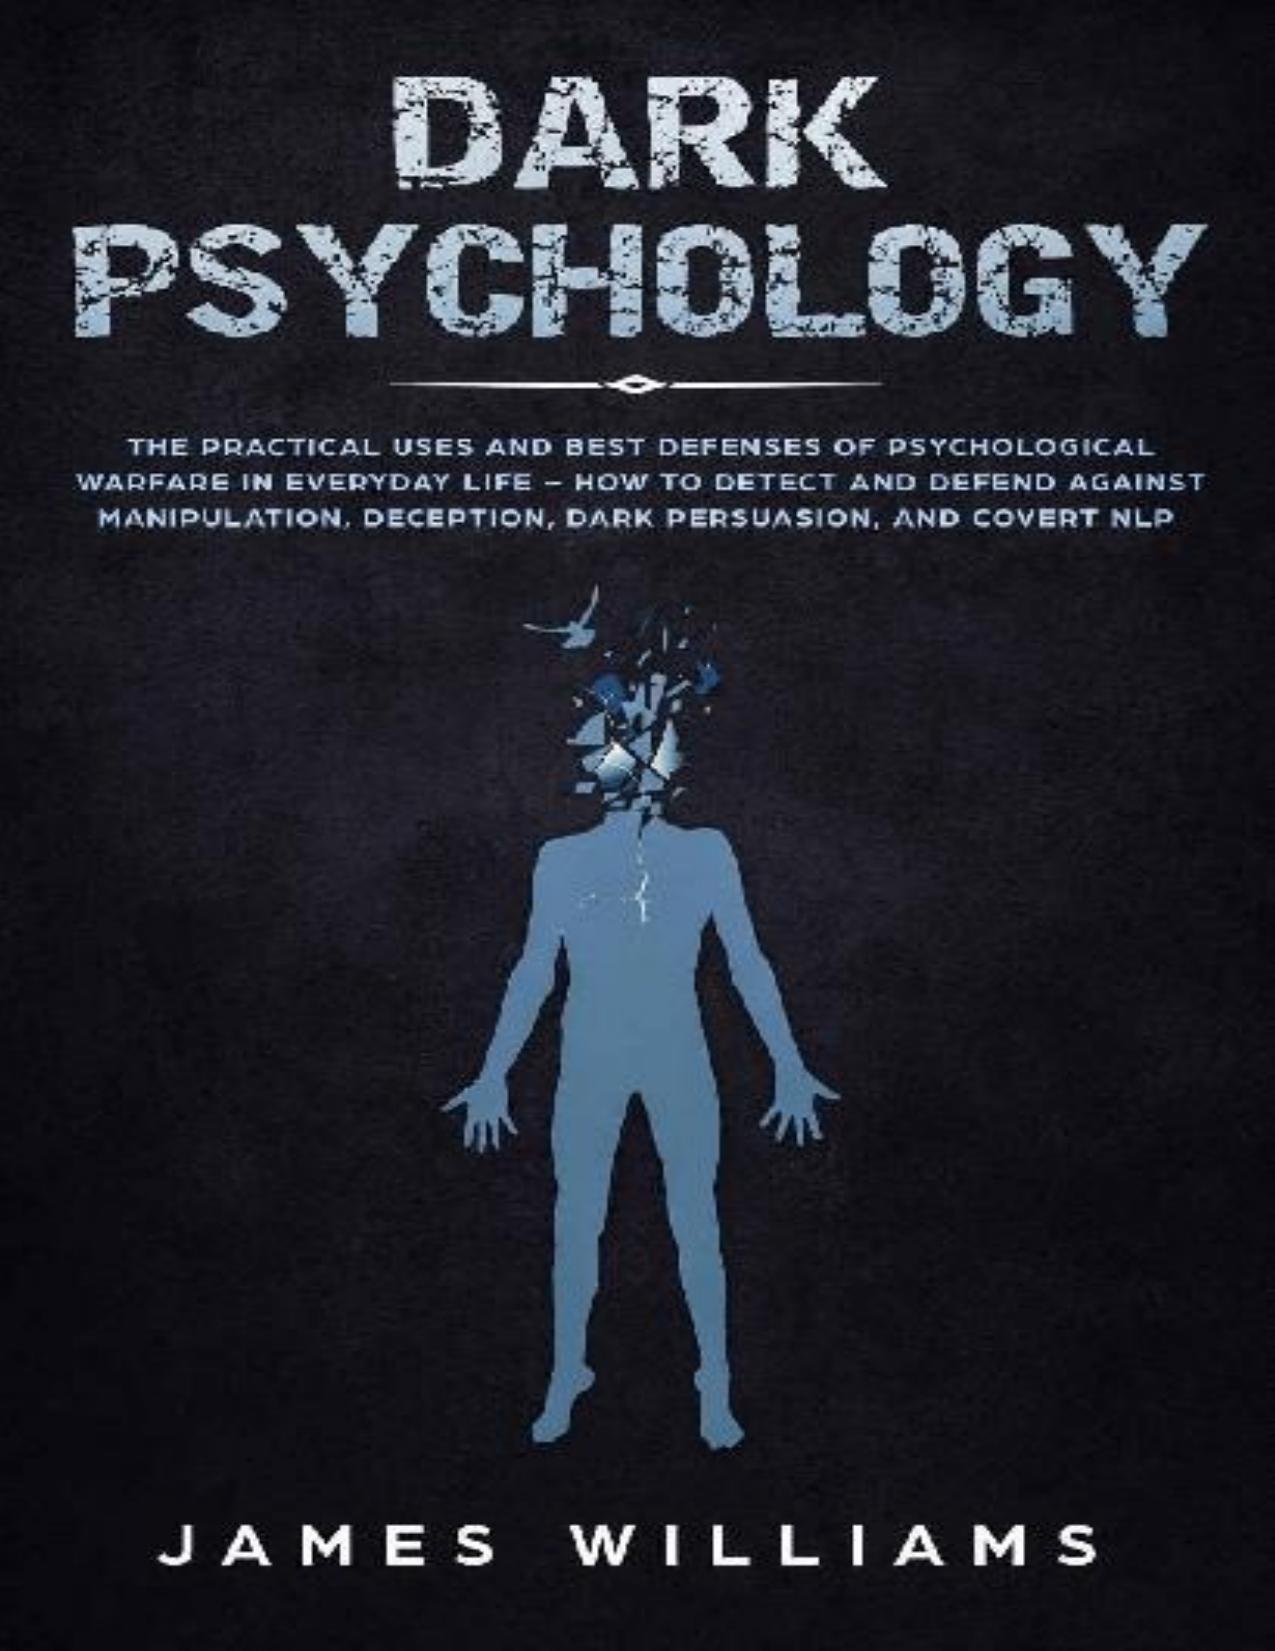 Dark Psychology: The Practical Uses and Best Defenses of Psychological Warfare in Everyday Life - PDFDrive.com